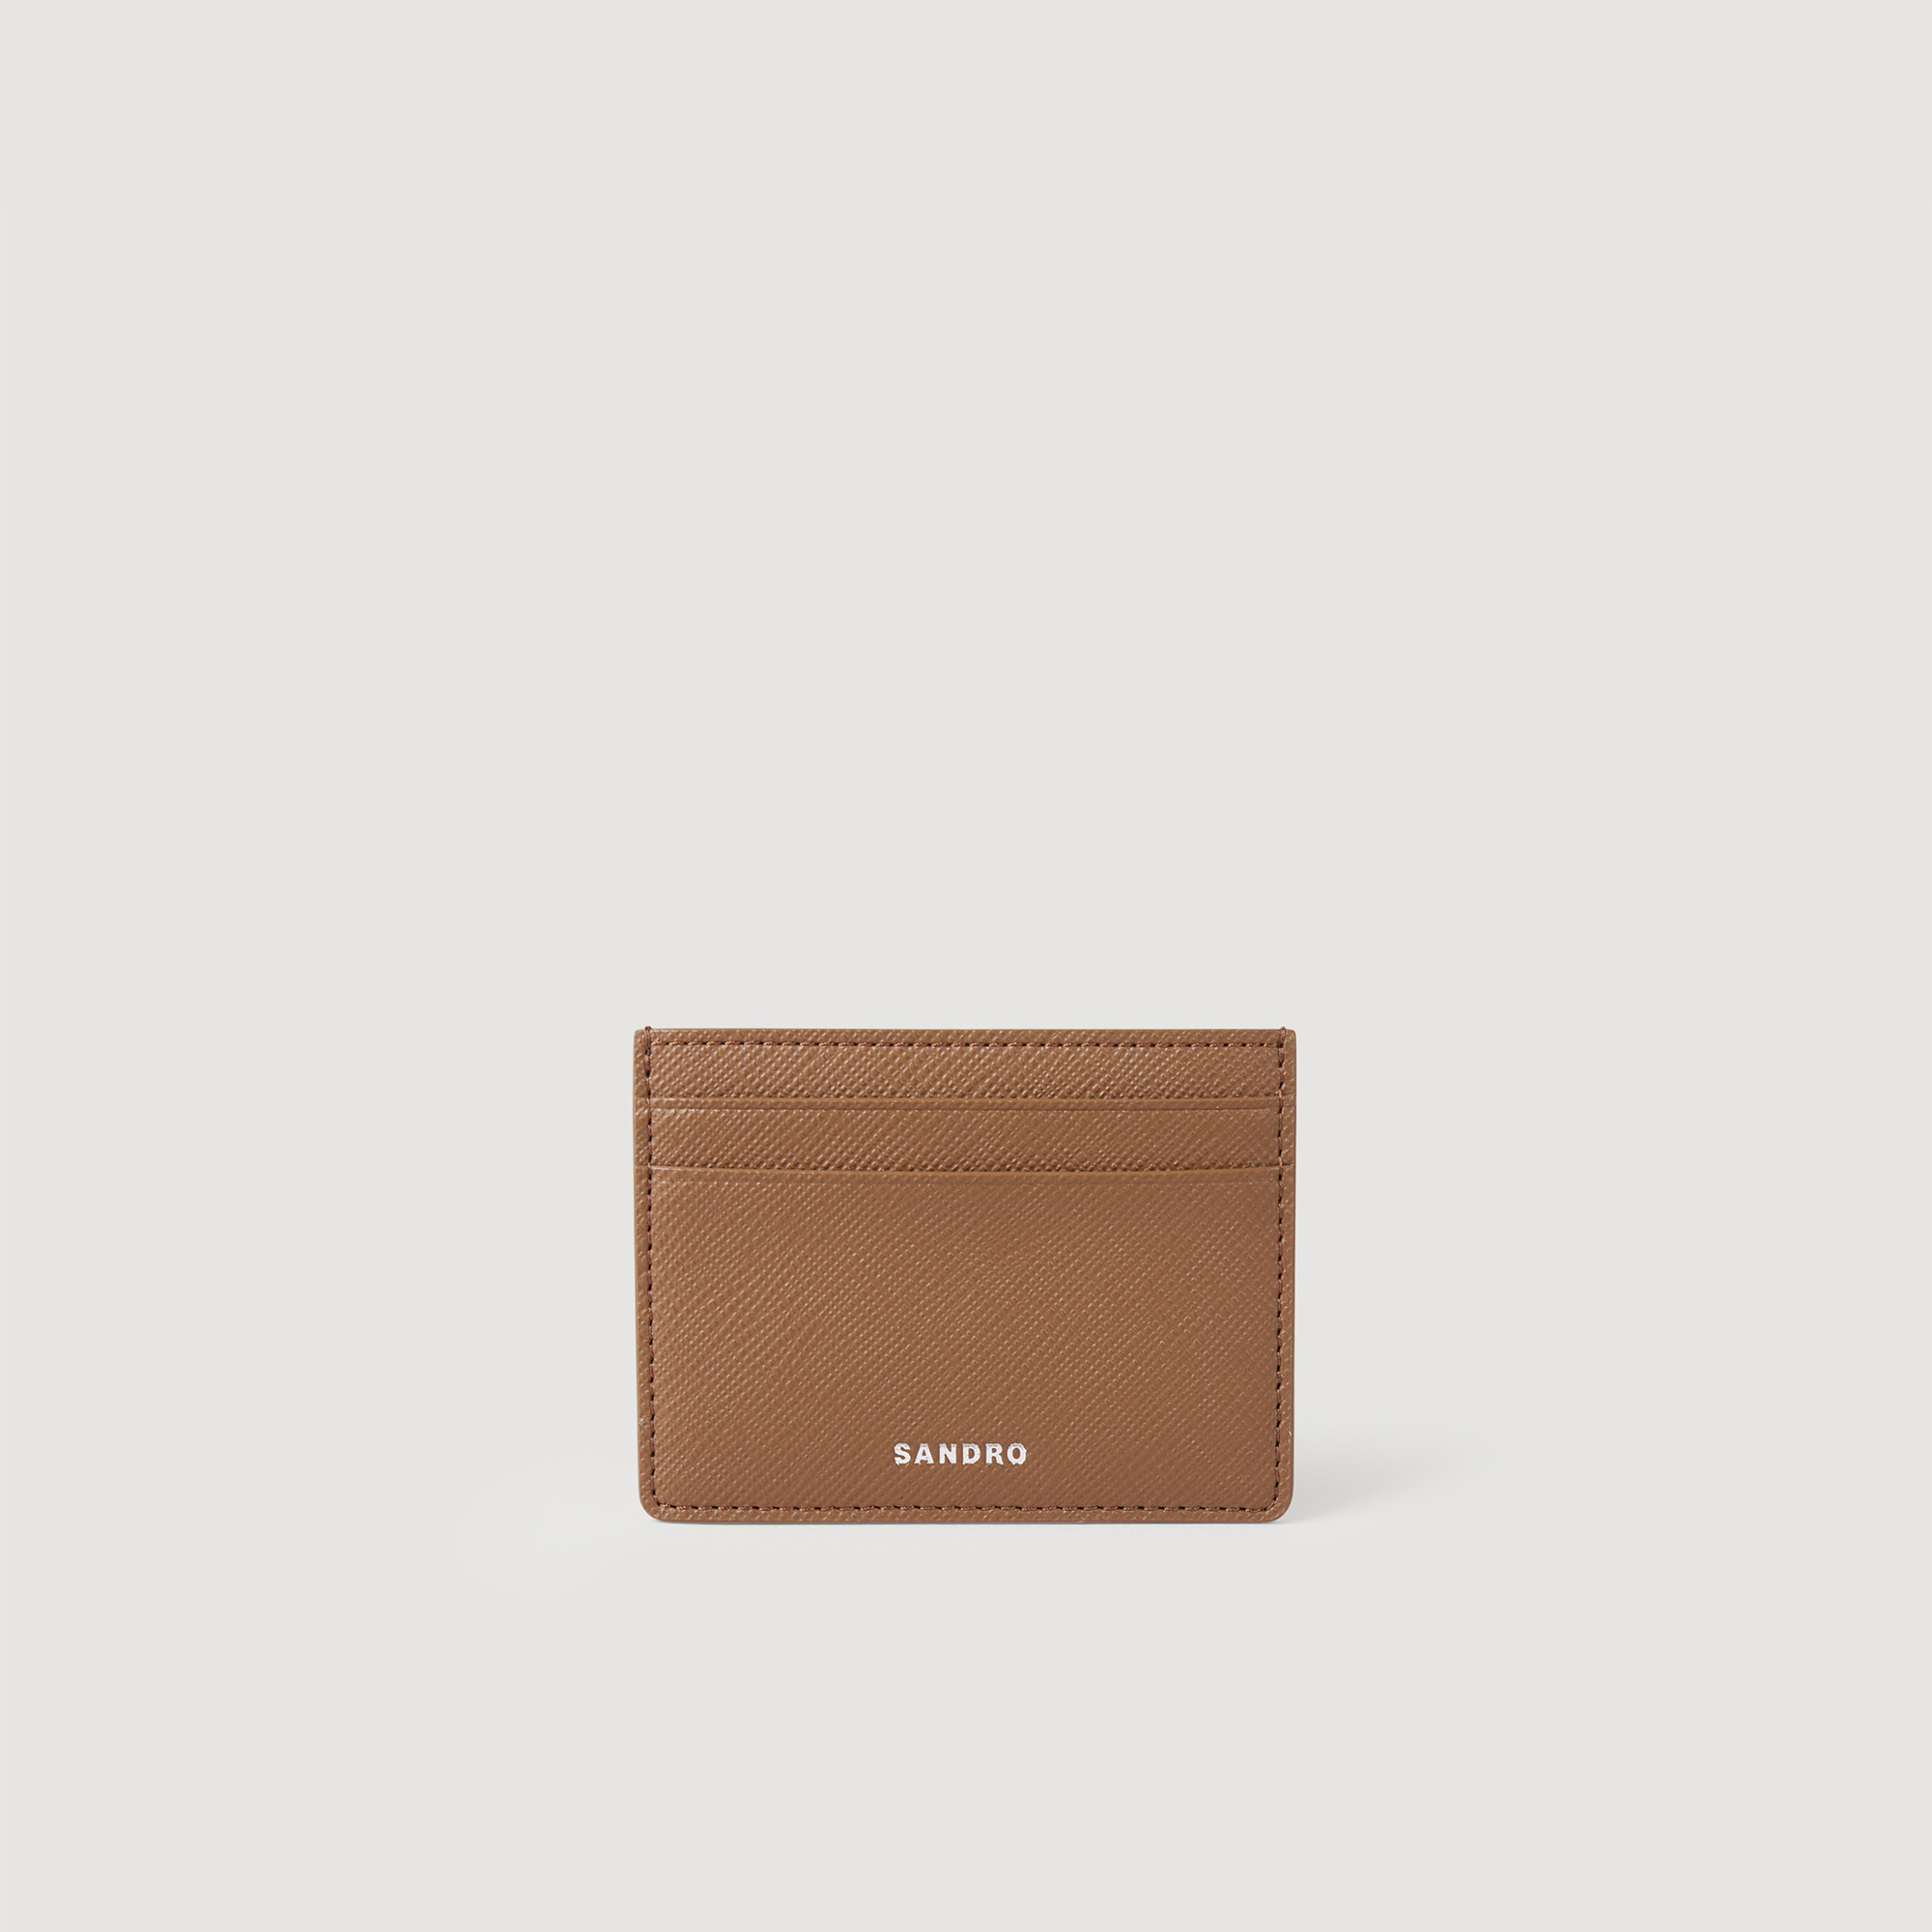 Sandro synderm Coating: Sandro men's leather card holder â€¢ Saffiano leather card holder â€¢ Four slots â€¢ One compartment â€¢ Embossed Sandro logo â€¢ Dimensions: 4 x 3 in By purchasing this product, you are supporting more responsible leather manufacturing via the Leather Working Group, which certifies tanneries based on their environmental performance (water, energy, waste, etc